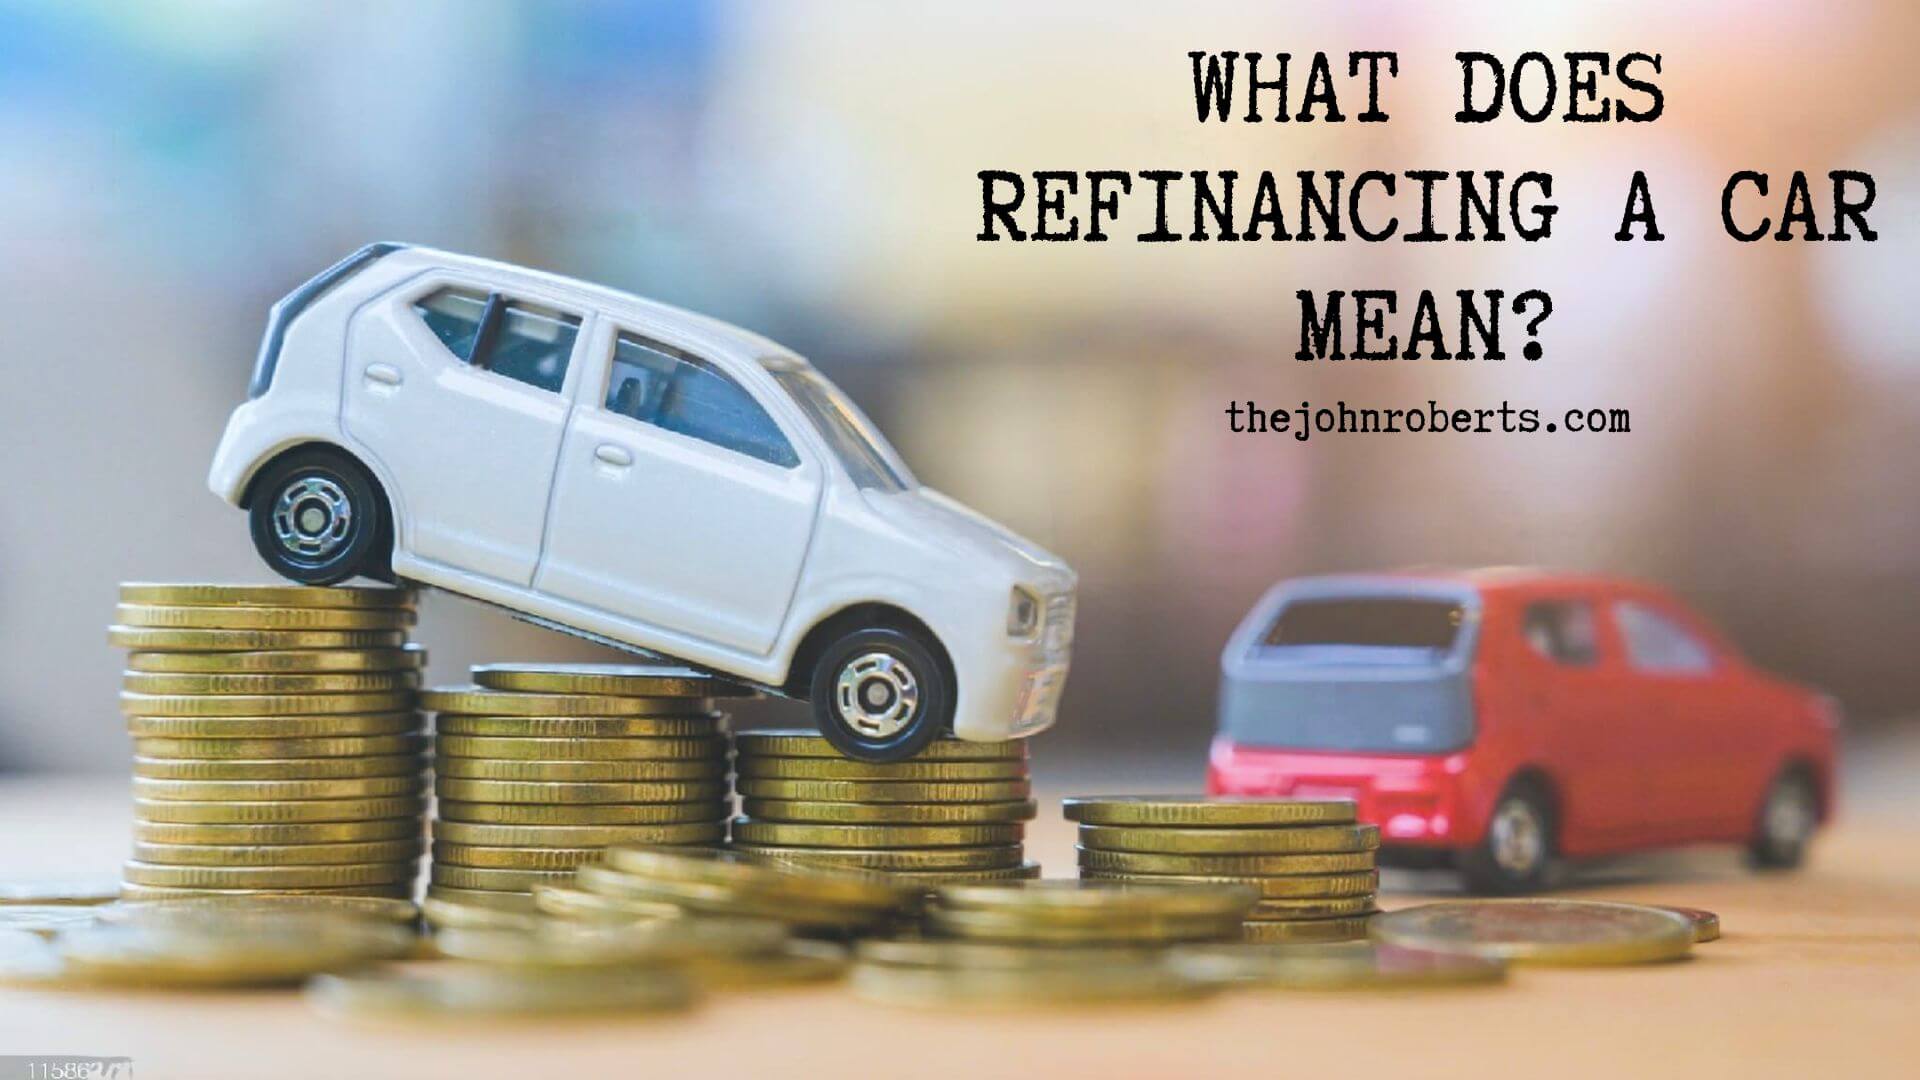 What Does Refinancing a Car Mean?